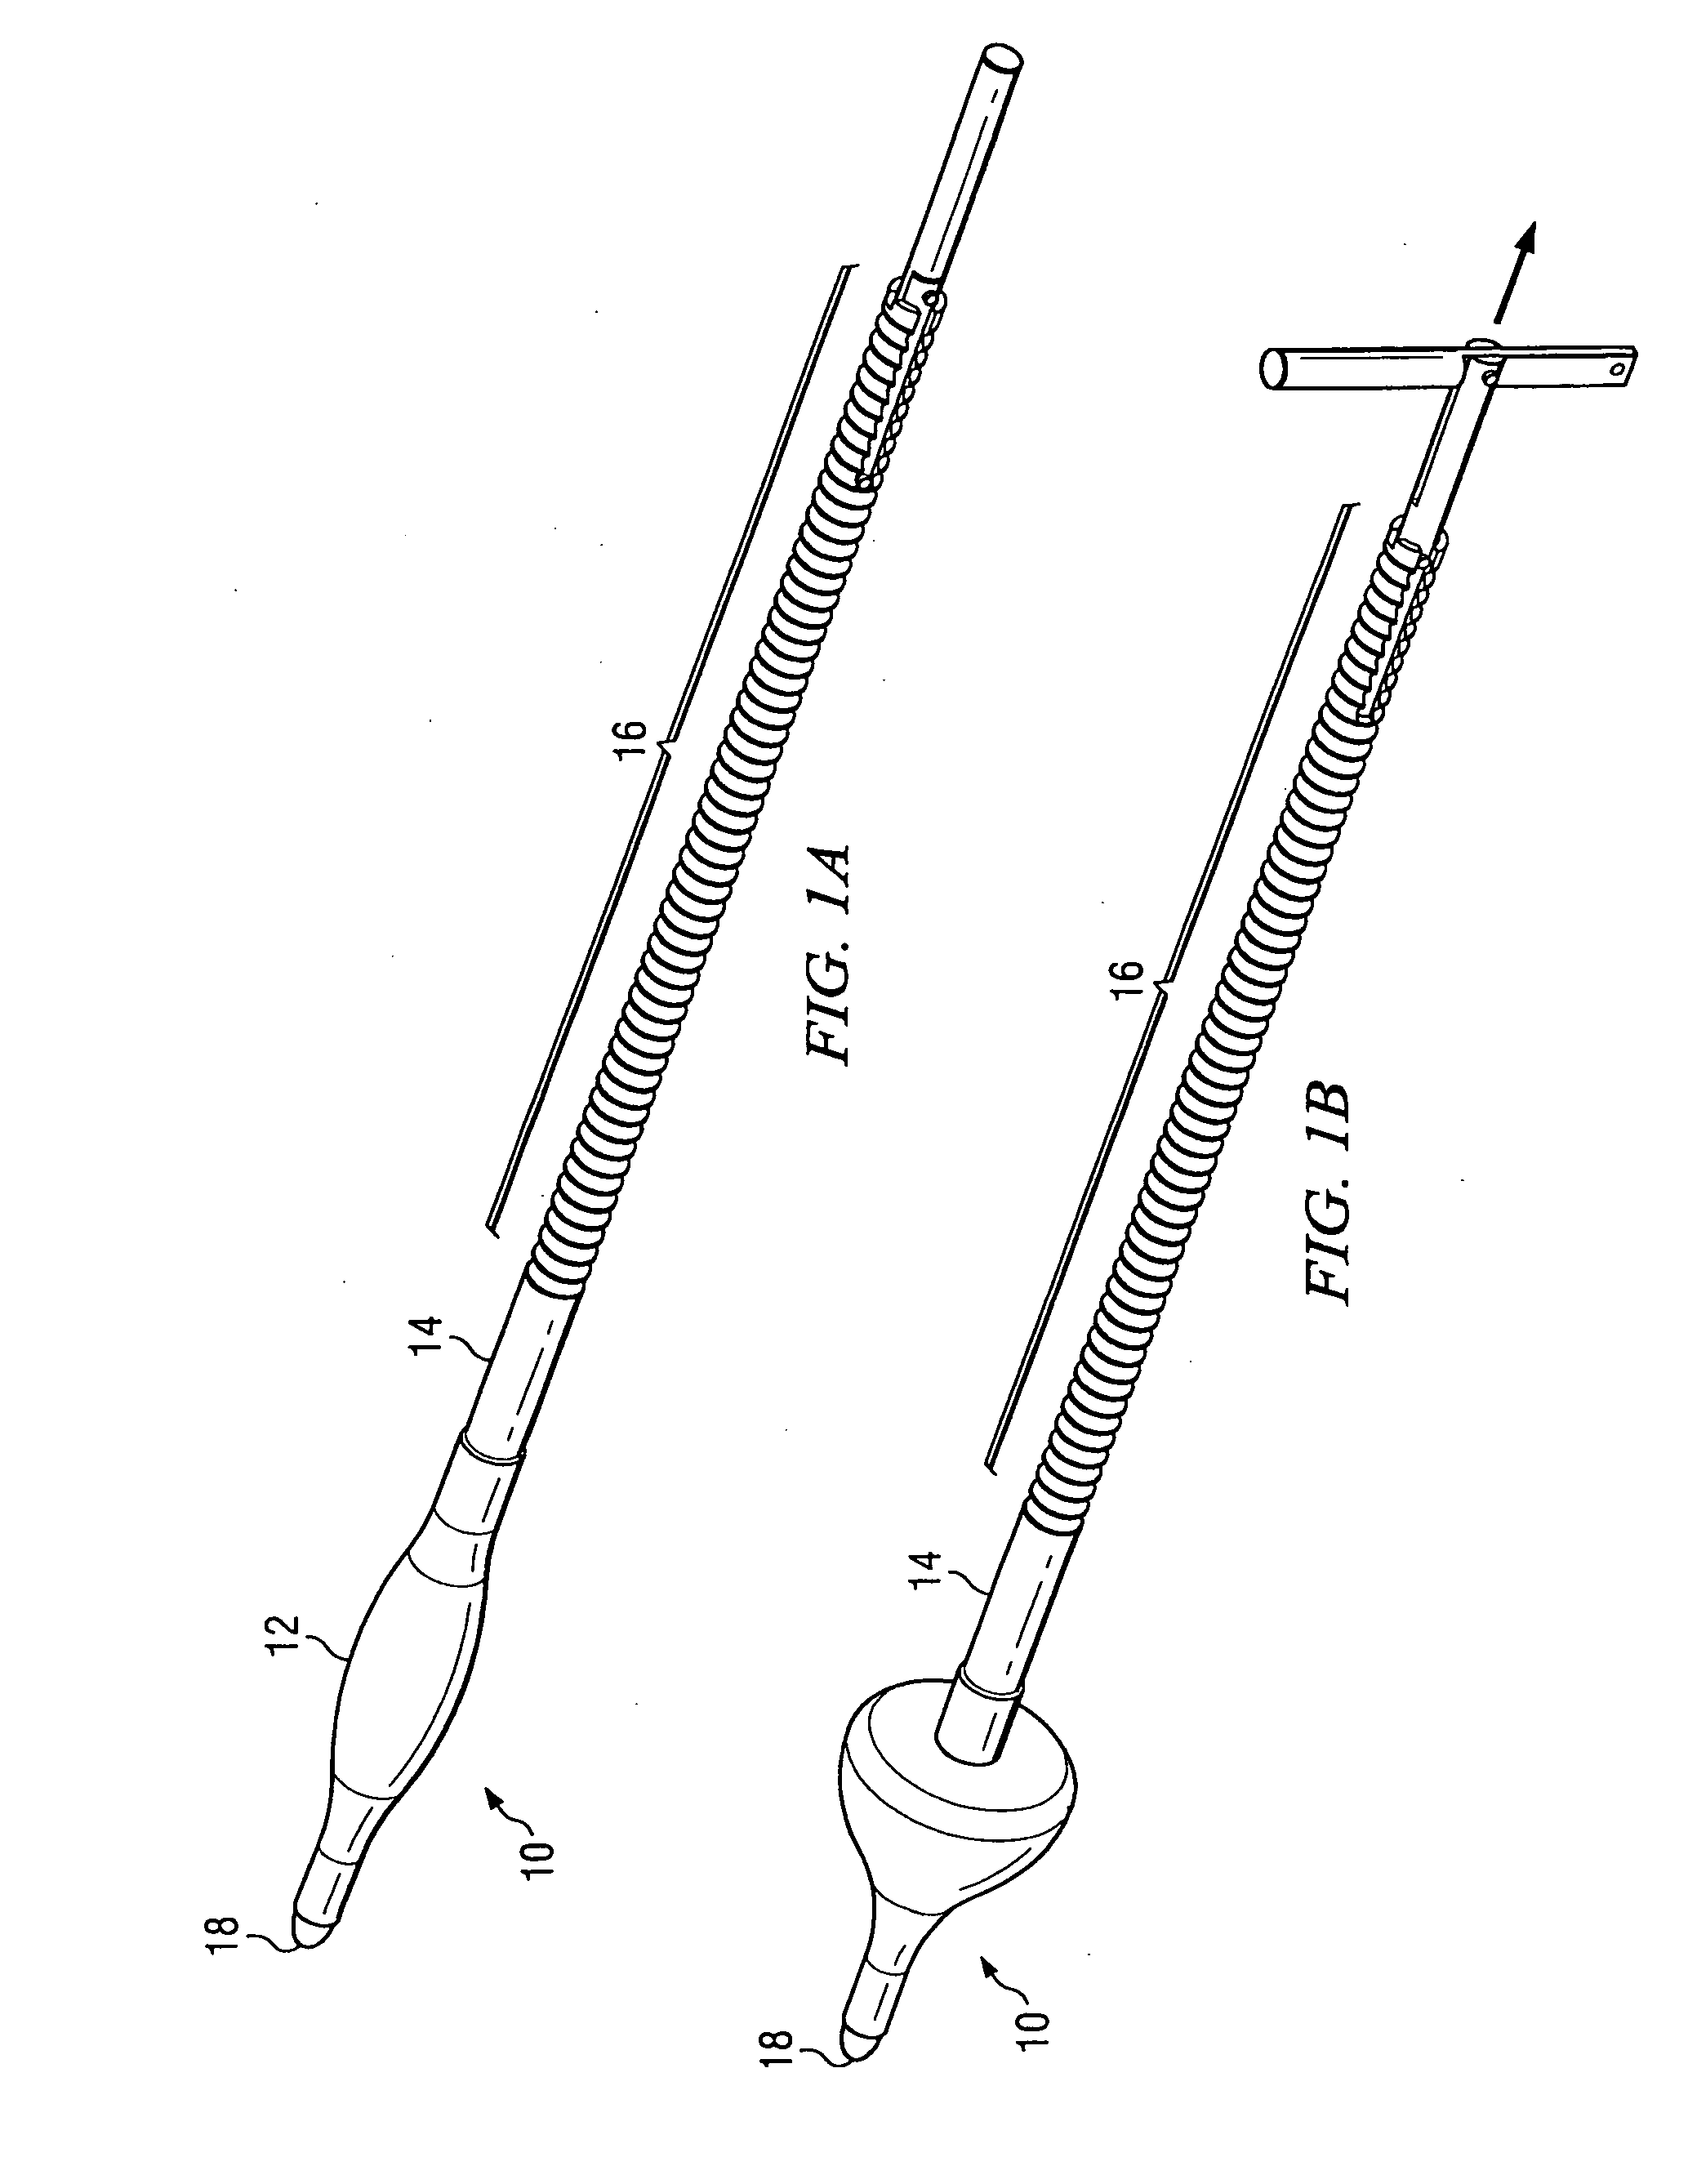 System, device, and method for providing access in a cardiovascular environment